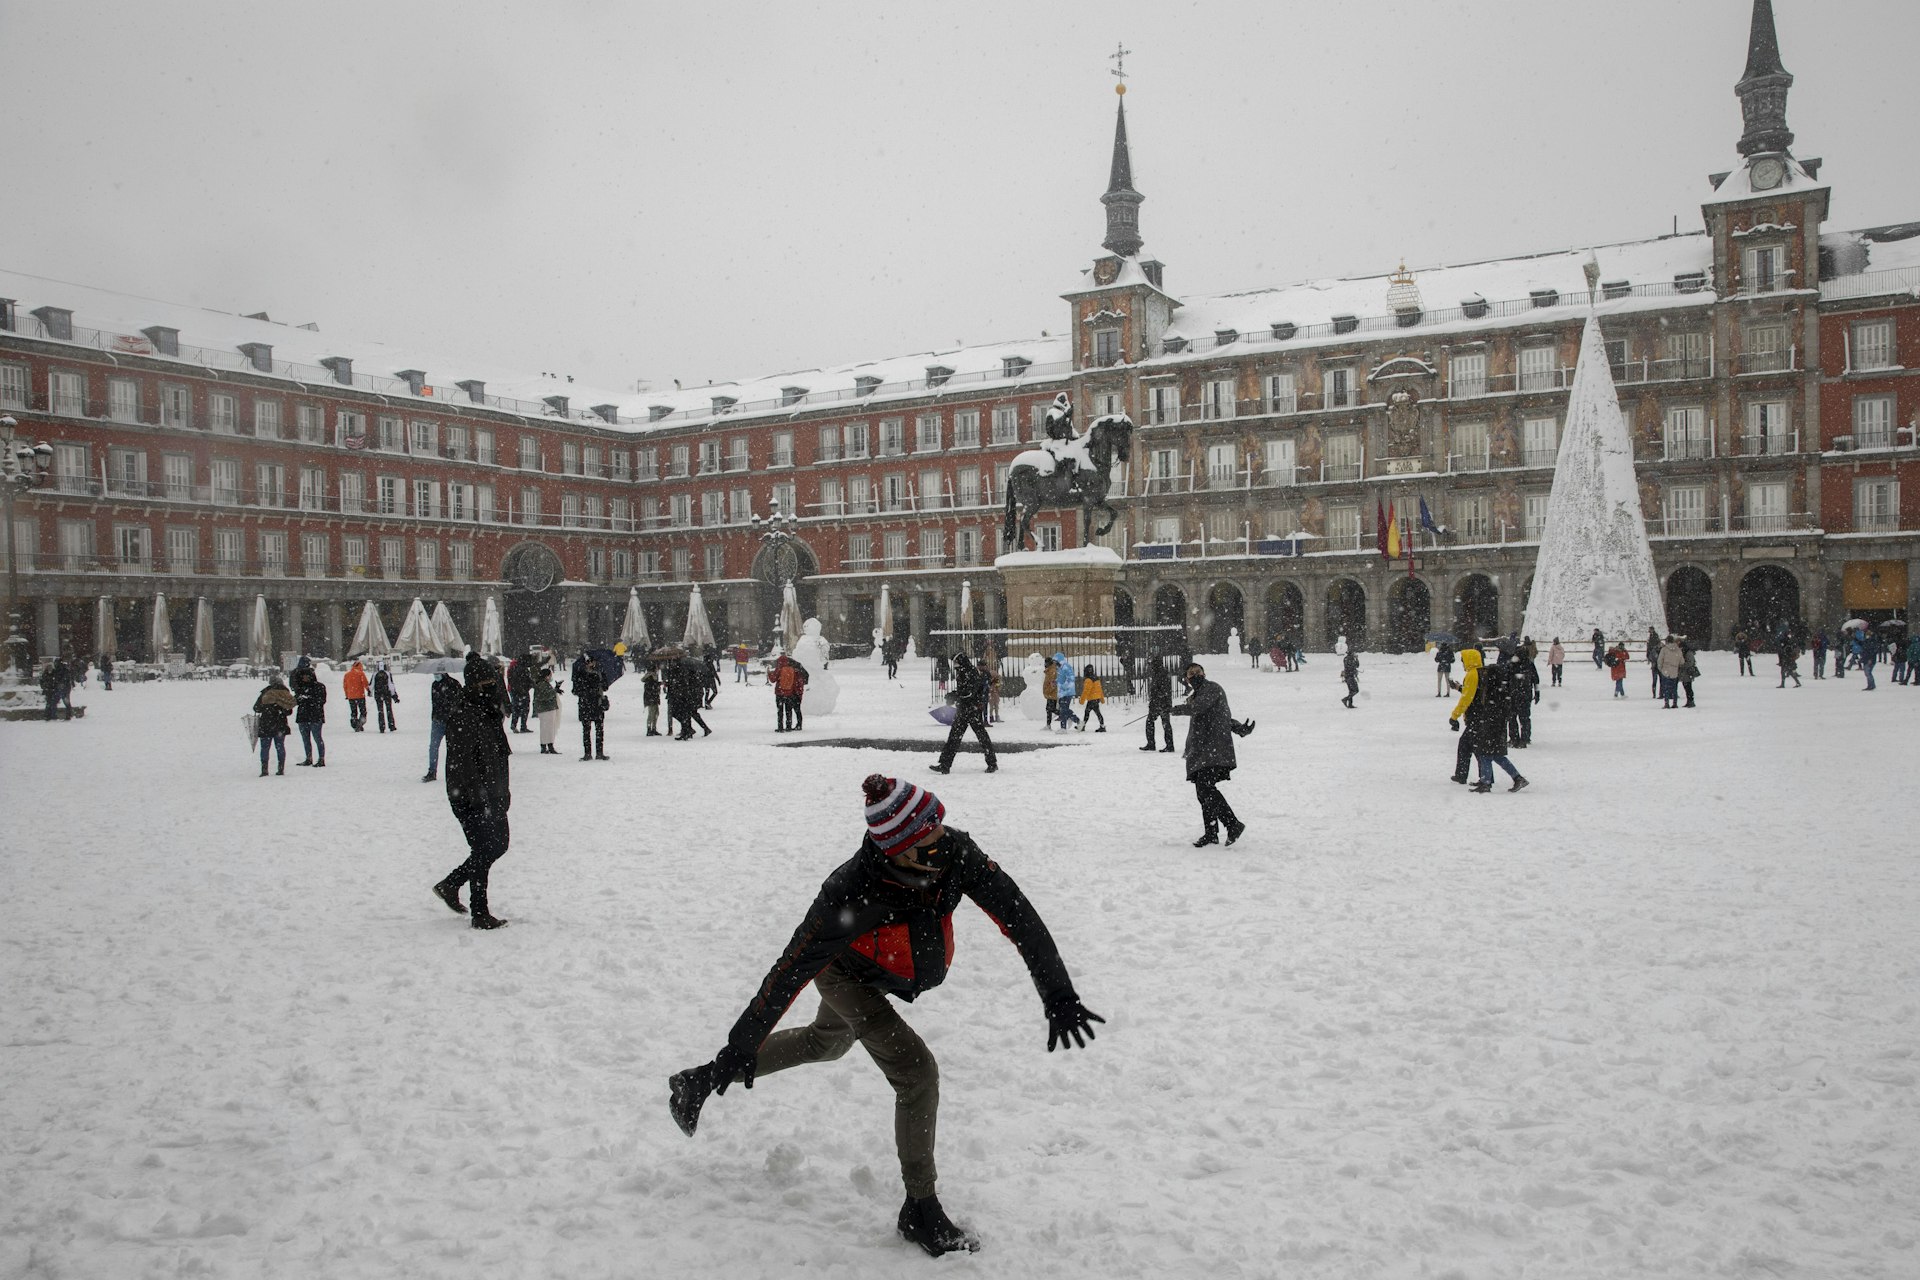 People thrown snowballs at each other in Madrid's Plaza Mayor